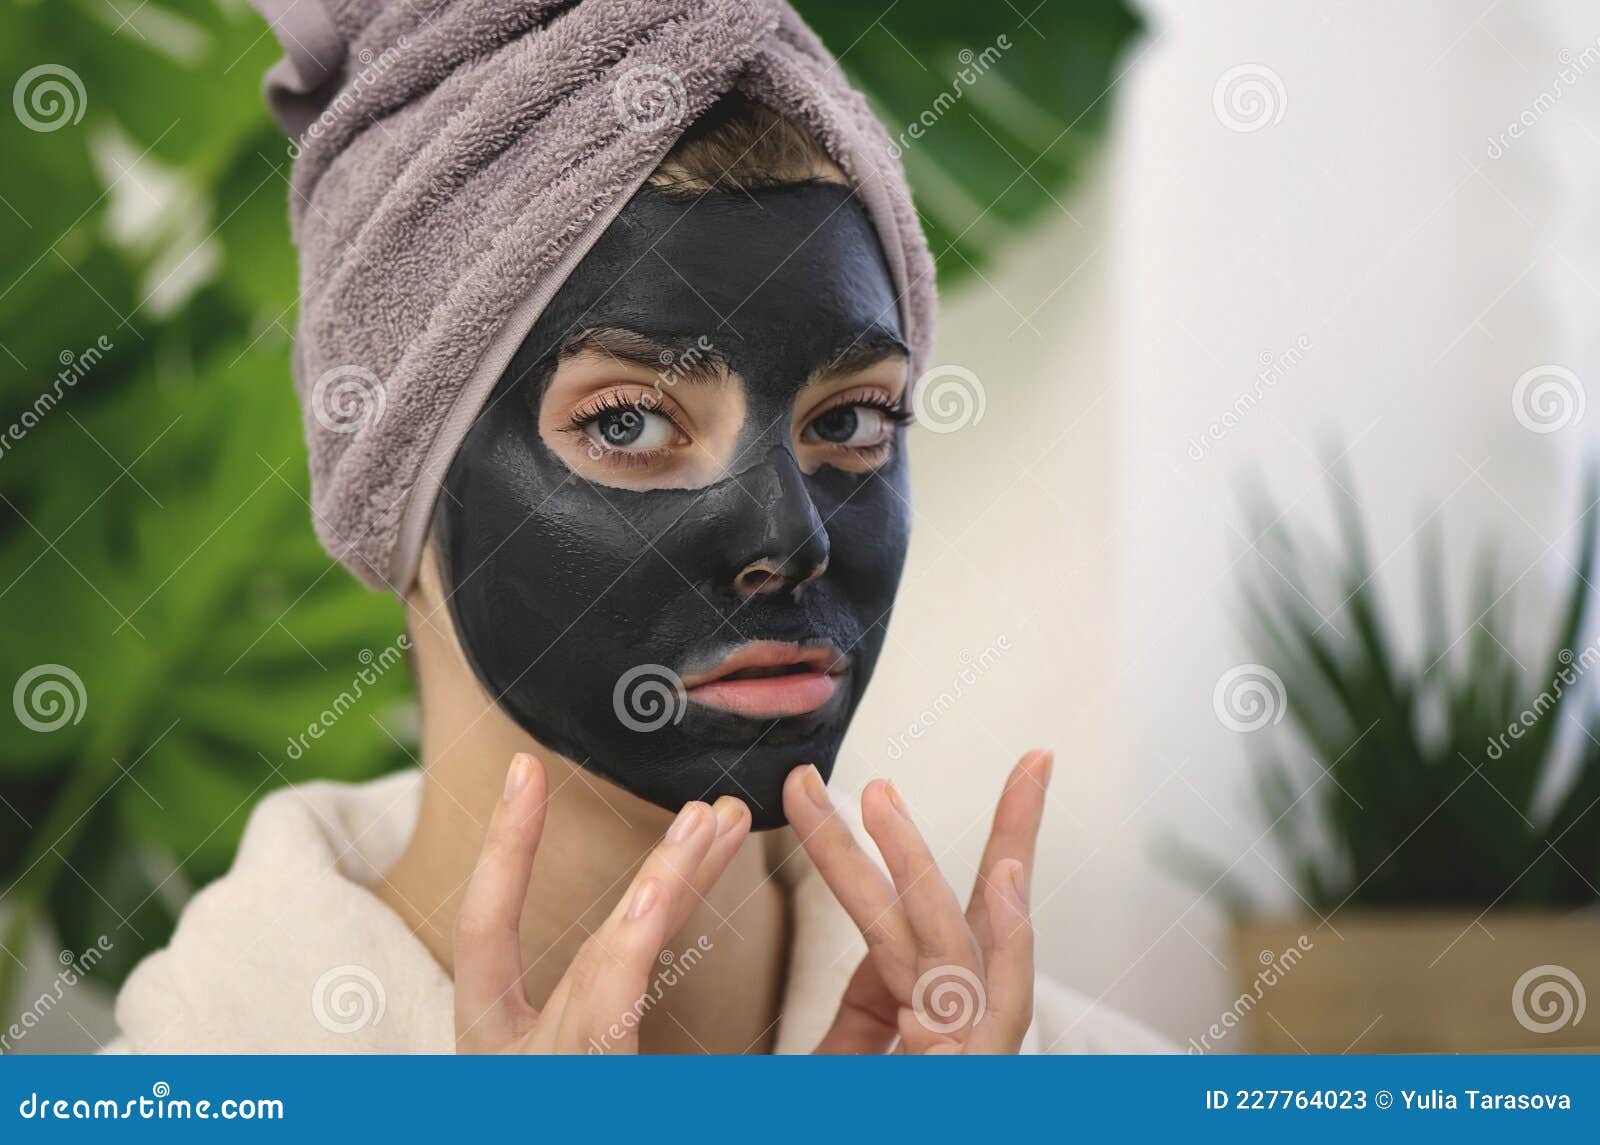 Young Woman Applying Black Face Mask on Her Face Stock Image - Image of ...